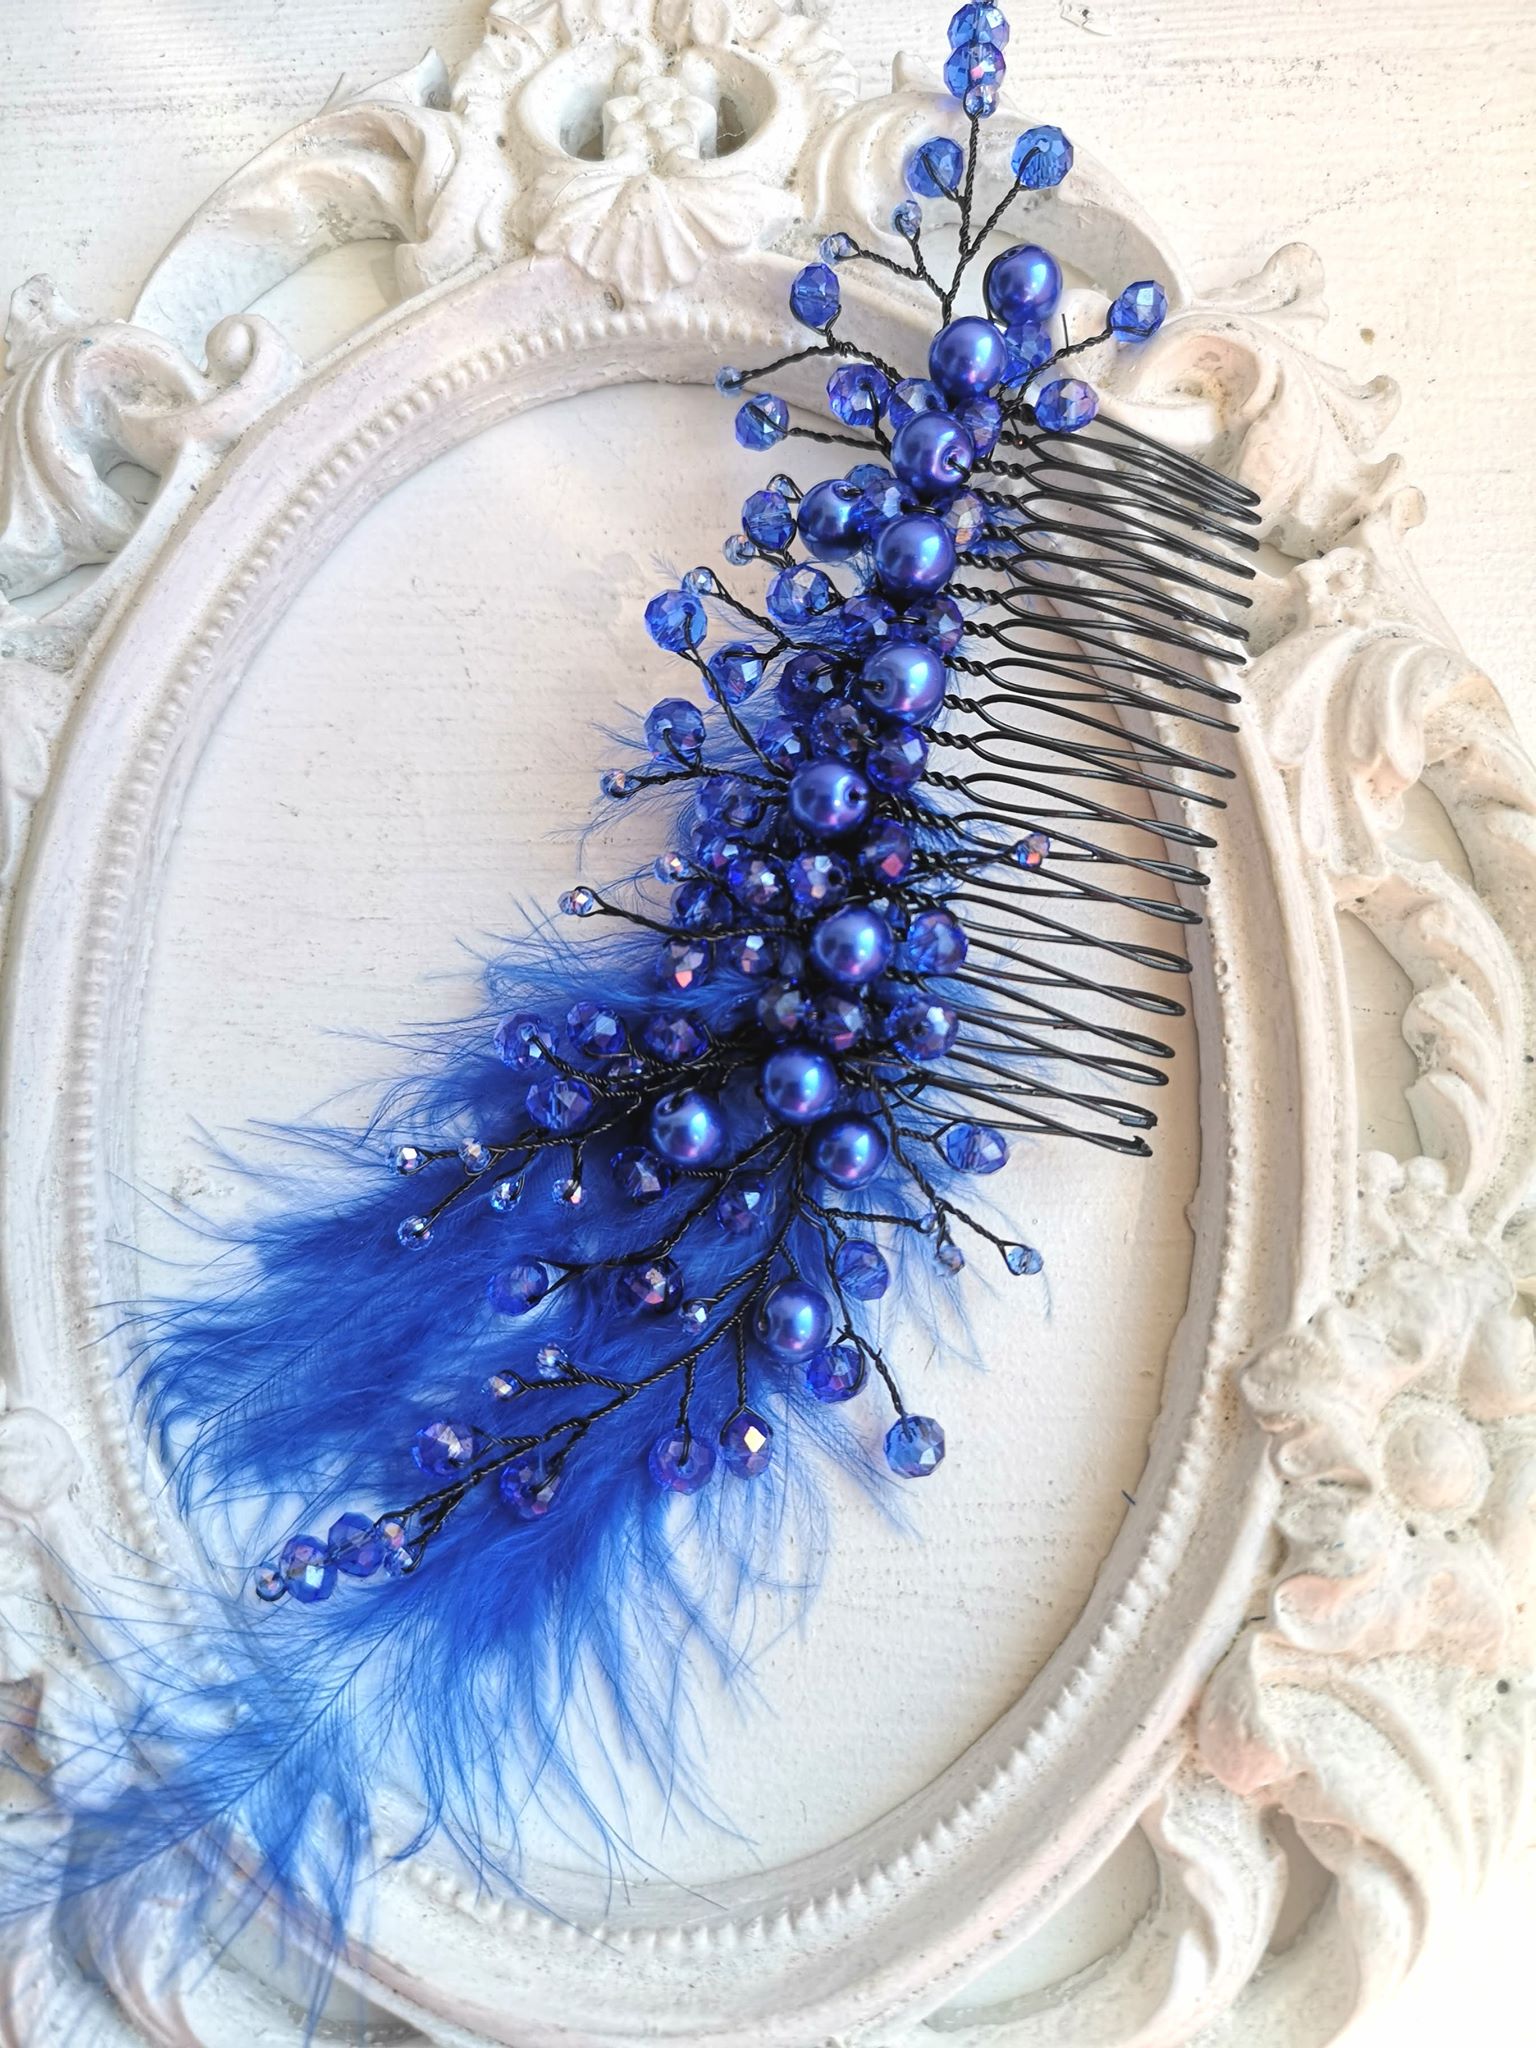 Mesmerizing Royal Blue Hair Comb with Crystals and Pearls - Blue Nebula